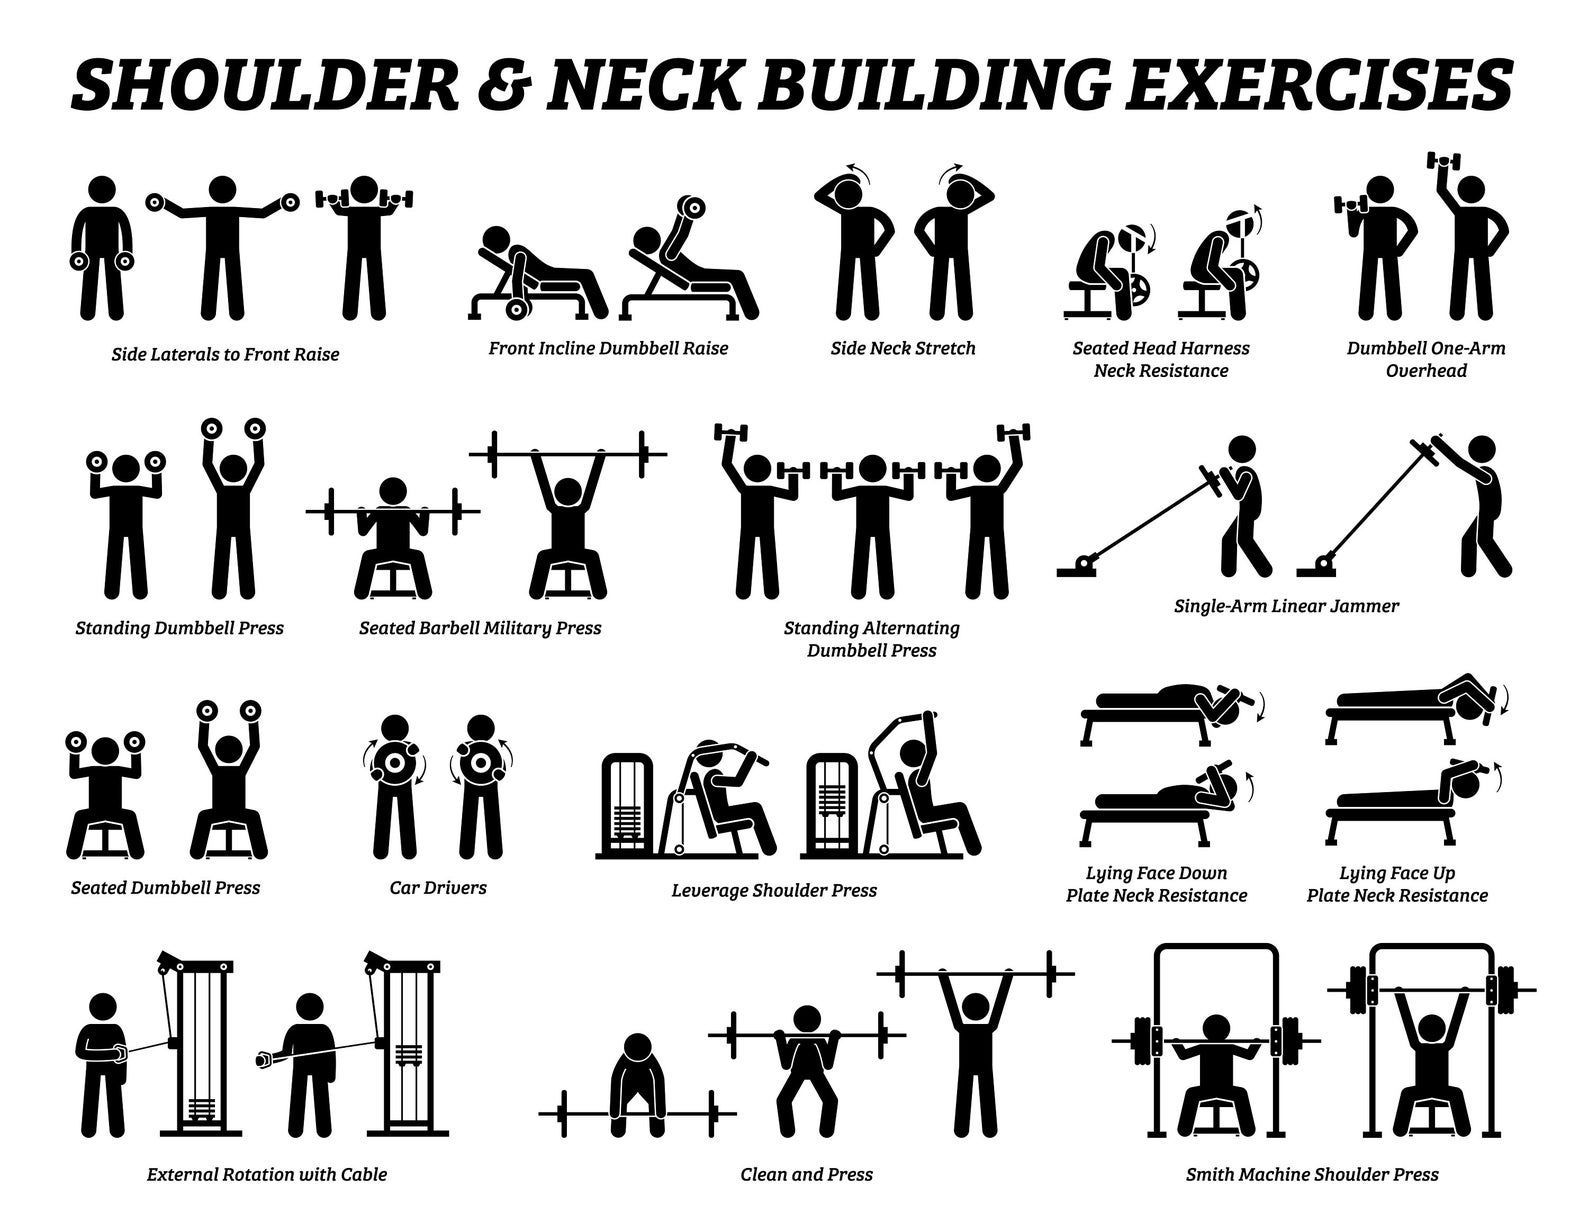 Muscle Building Body Builder Gym Fitness Exercise Weight Training Bodybuilder Lifting Workout Sport SVG PNG Icons Stick Figure Bundle Vector - Muscle Building Body Builder Gym Fitness Exercise Weight Training Bodybuilder Lifting Workout Sport SVG PNG Icons Stick Figure Bundle Vector -   19 fitness Routine gym ideas